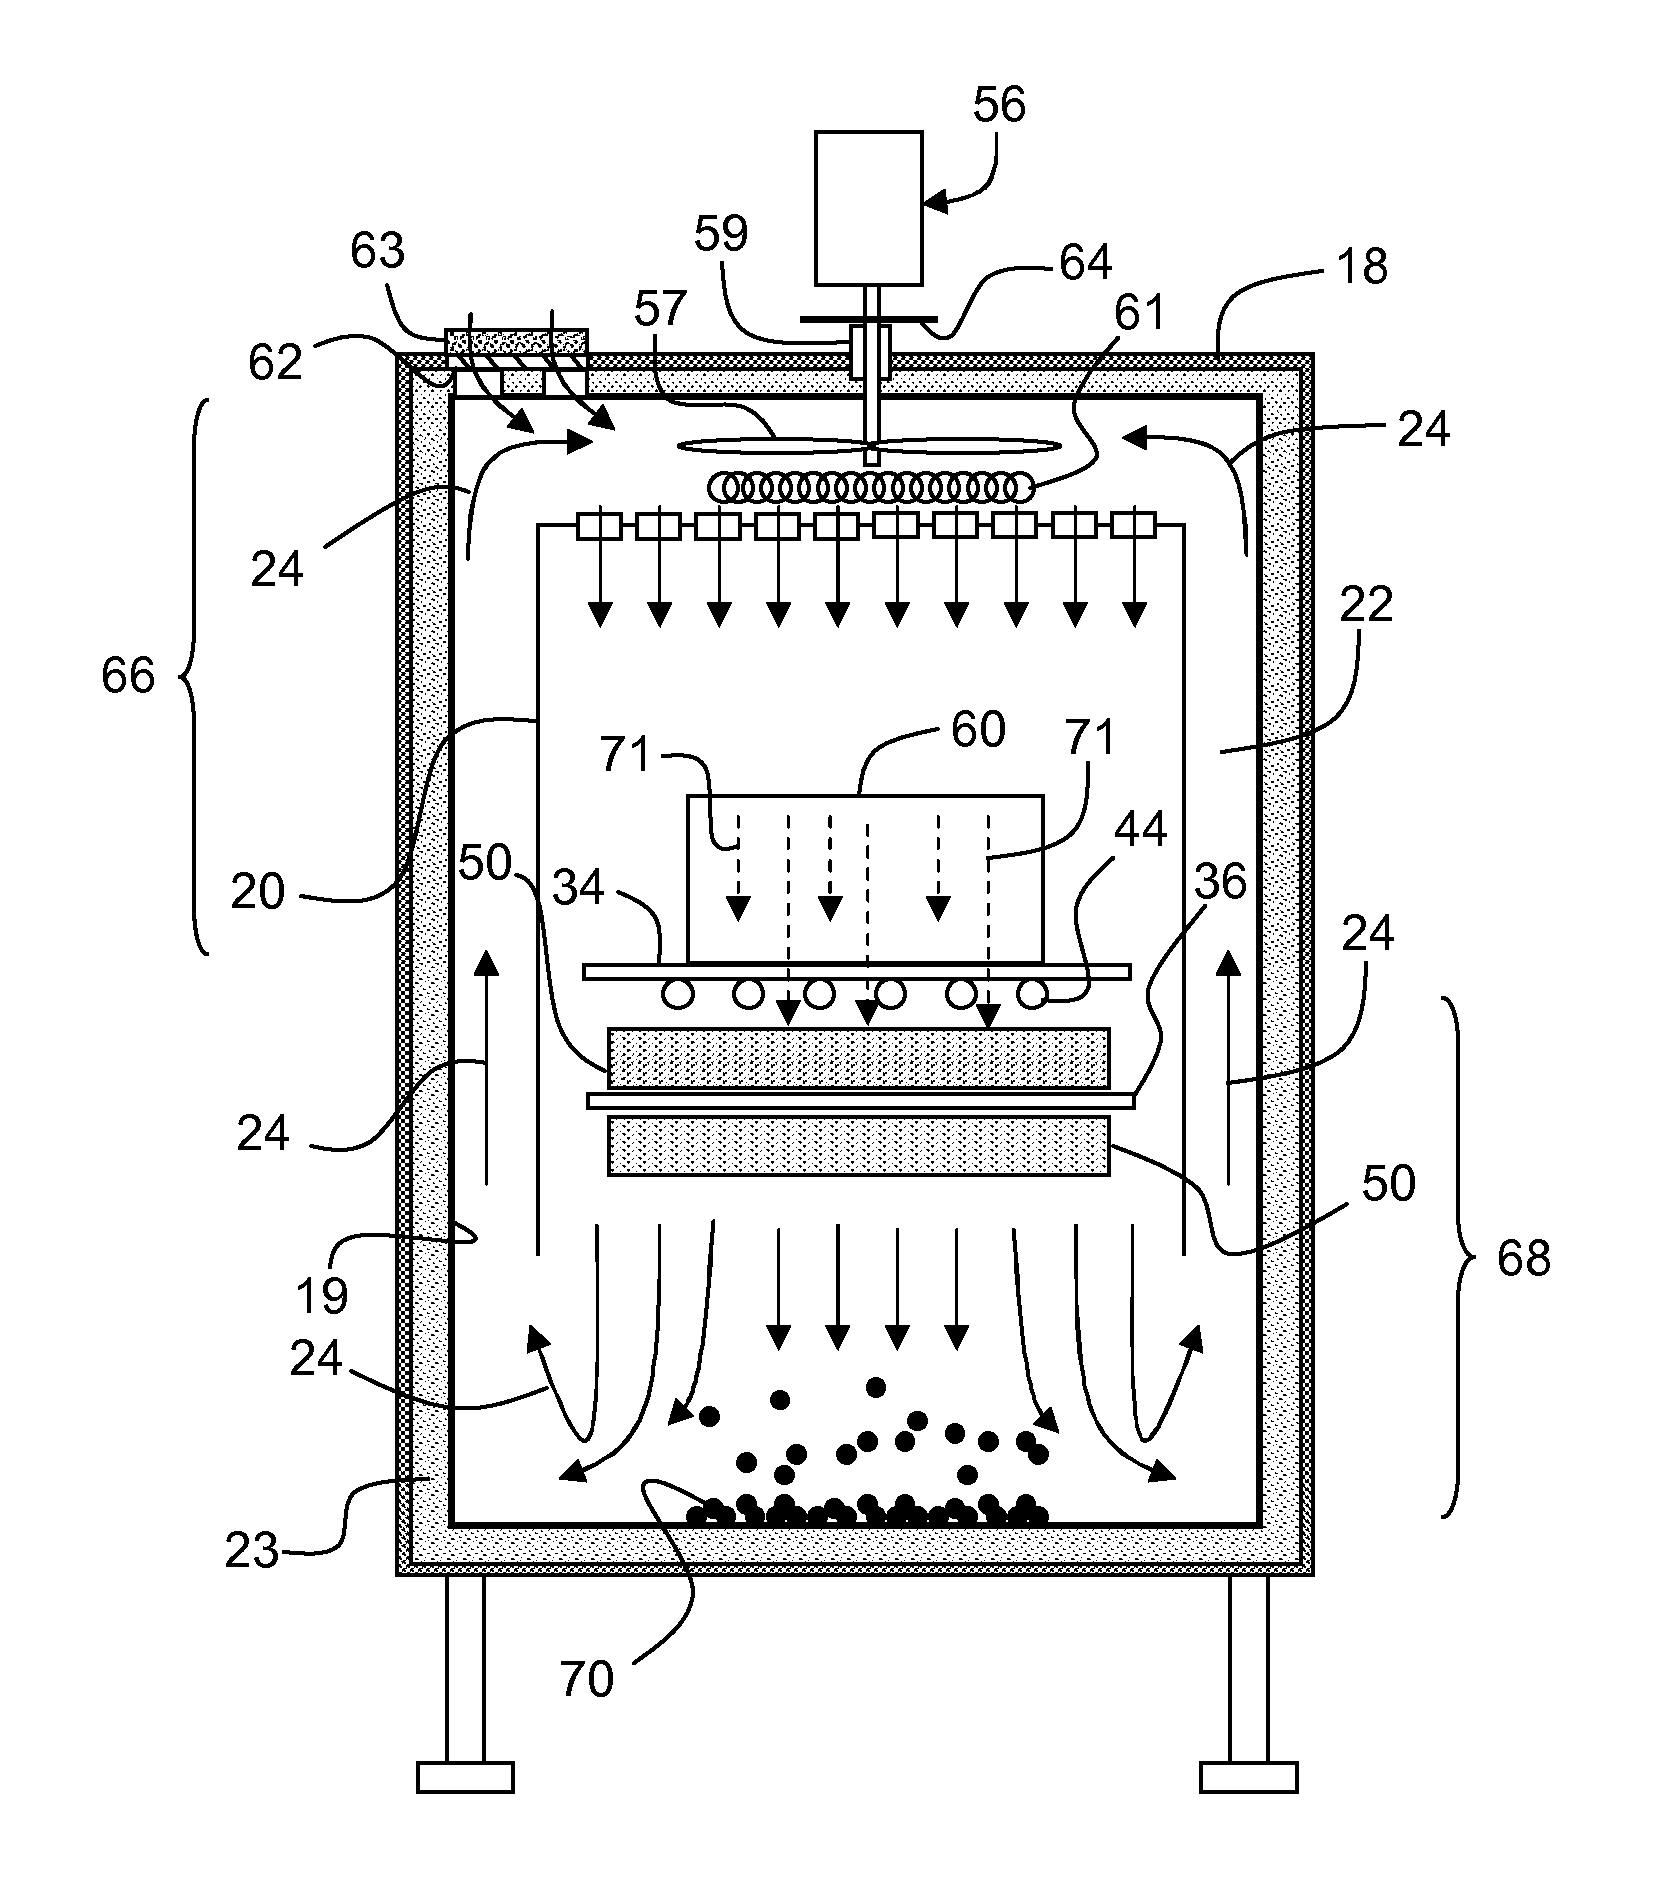 Apparatus and method for heat treating glass sheets